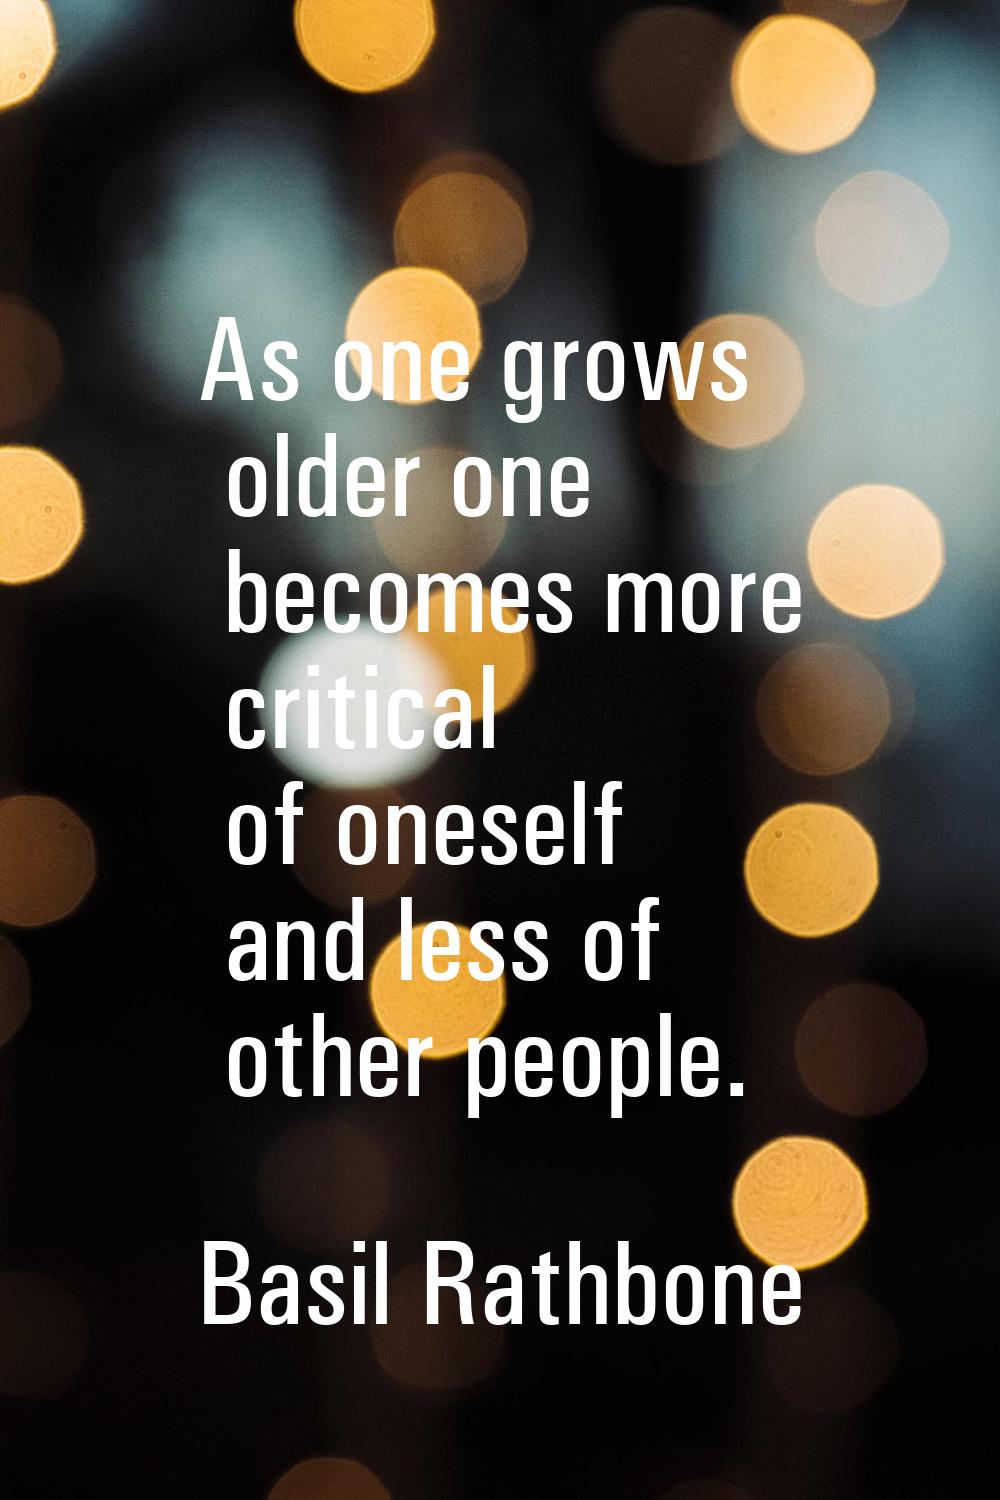 As one grows older one becomes more critical of oneself and less of other people.